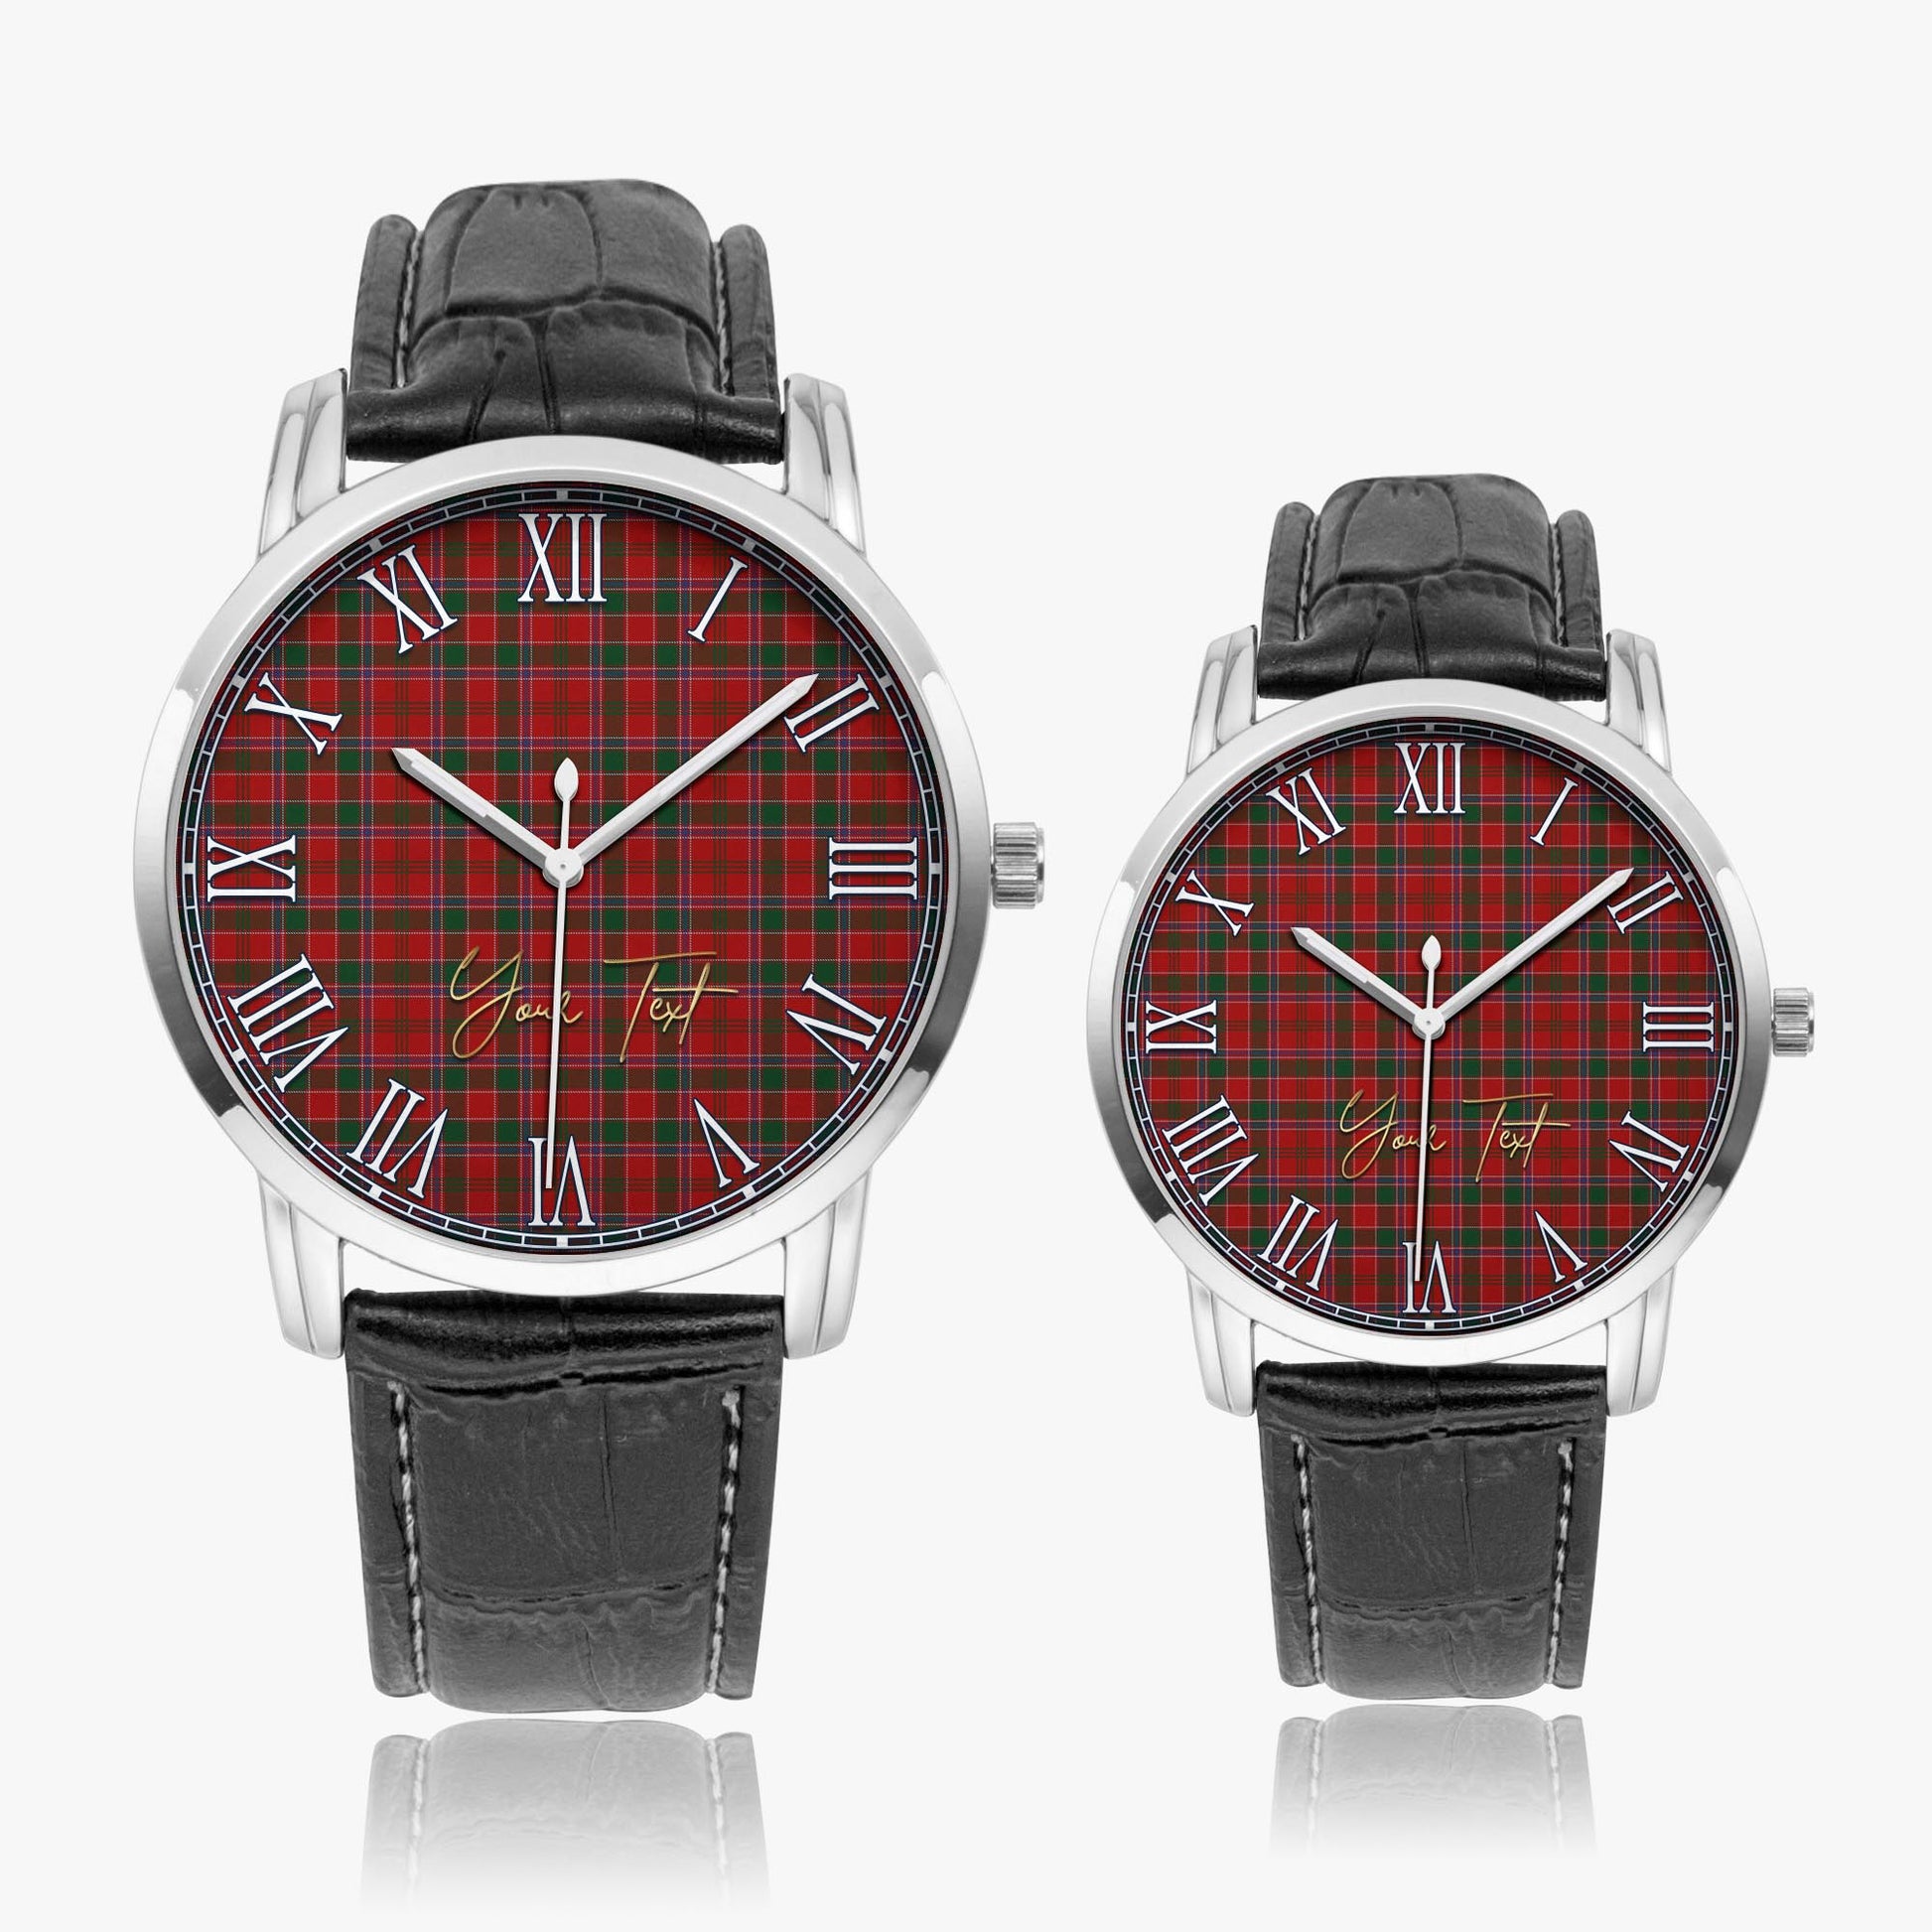 Dalzell (Dalziel) Tartan Personalized Your Text Leather Trap Quartz Watch Wide Type Silver Case With Black Leather Strap - Tartanvibesclothing